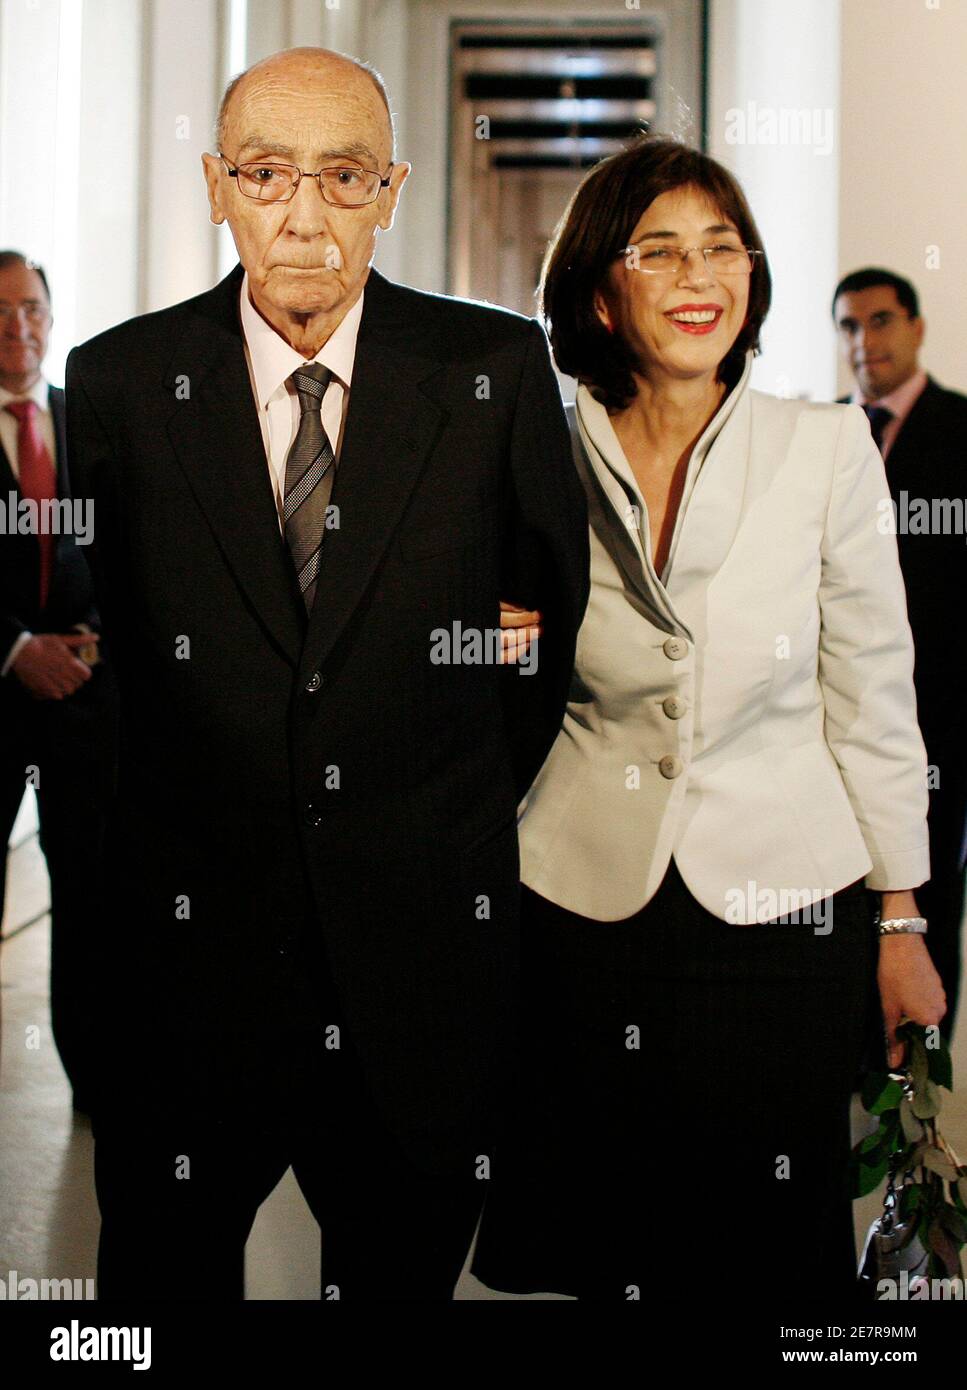 Portuguese Nobel Literature laureate Jose Saramago (L) and his wife Pilar Del Rio walk in his exhibition called "Consistencia dos Sonhos" (Consistency of Dreams) in Lisbon April 23, 2008. The multimedia exhibition, which opens to public from April 23 to July 27, displays documents on the life and work of Saramago, including original texts. REUTERS/Nacho Doce (PORTUGAL) Banque D'Images